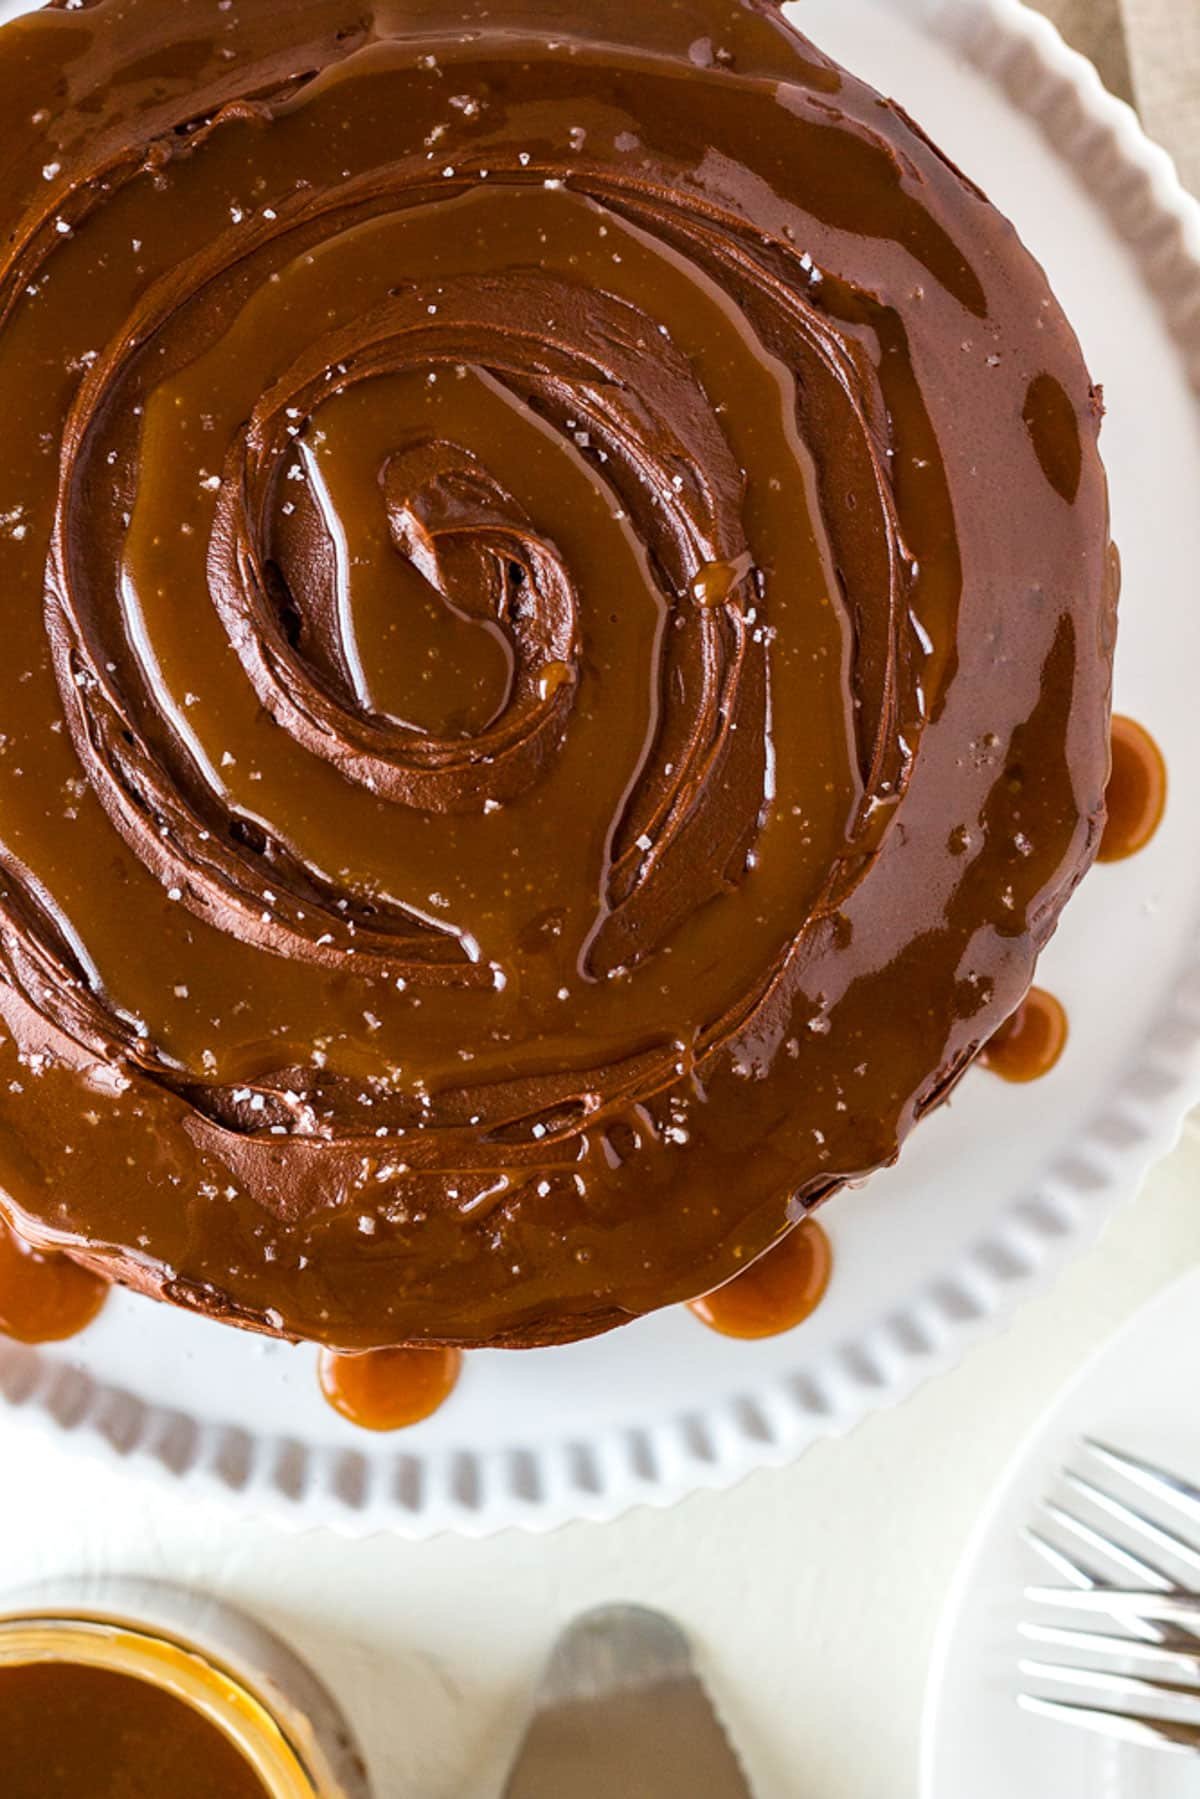 top view of a chocolate cake topped with buttercream frosting and caramel sauce dripping down the sides.